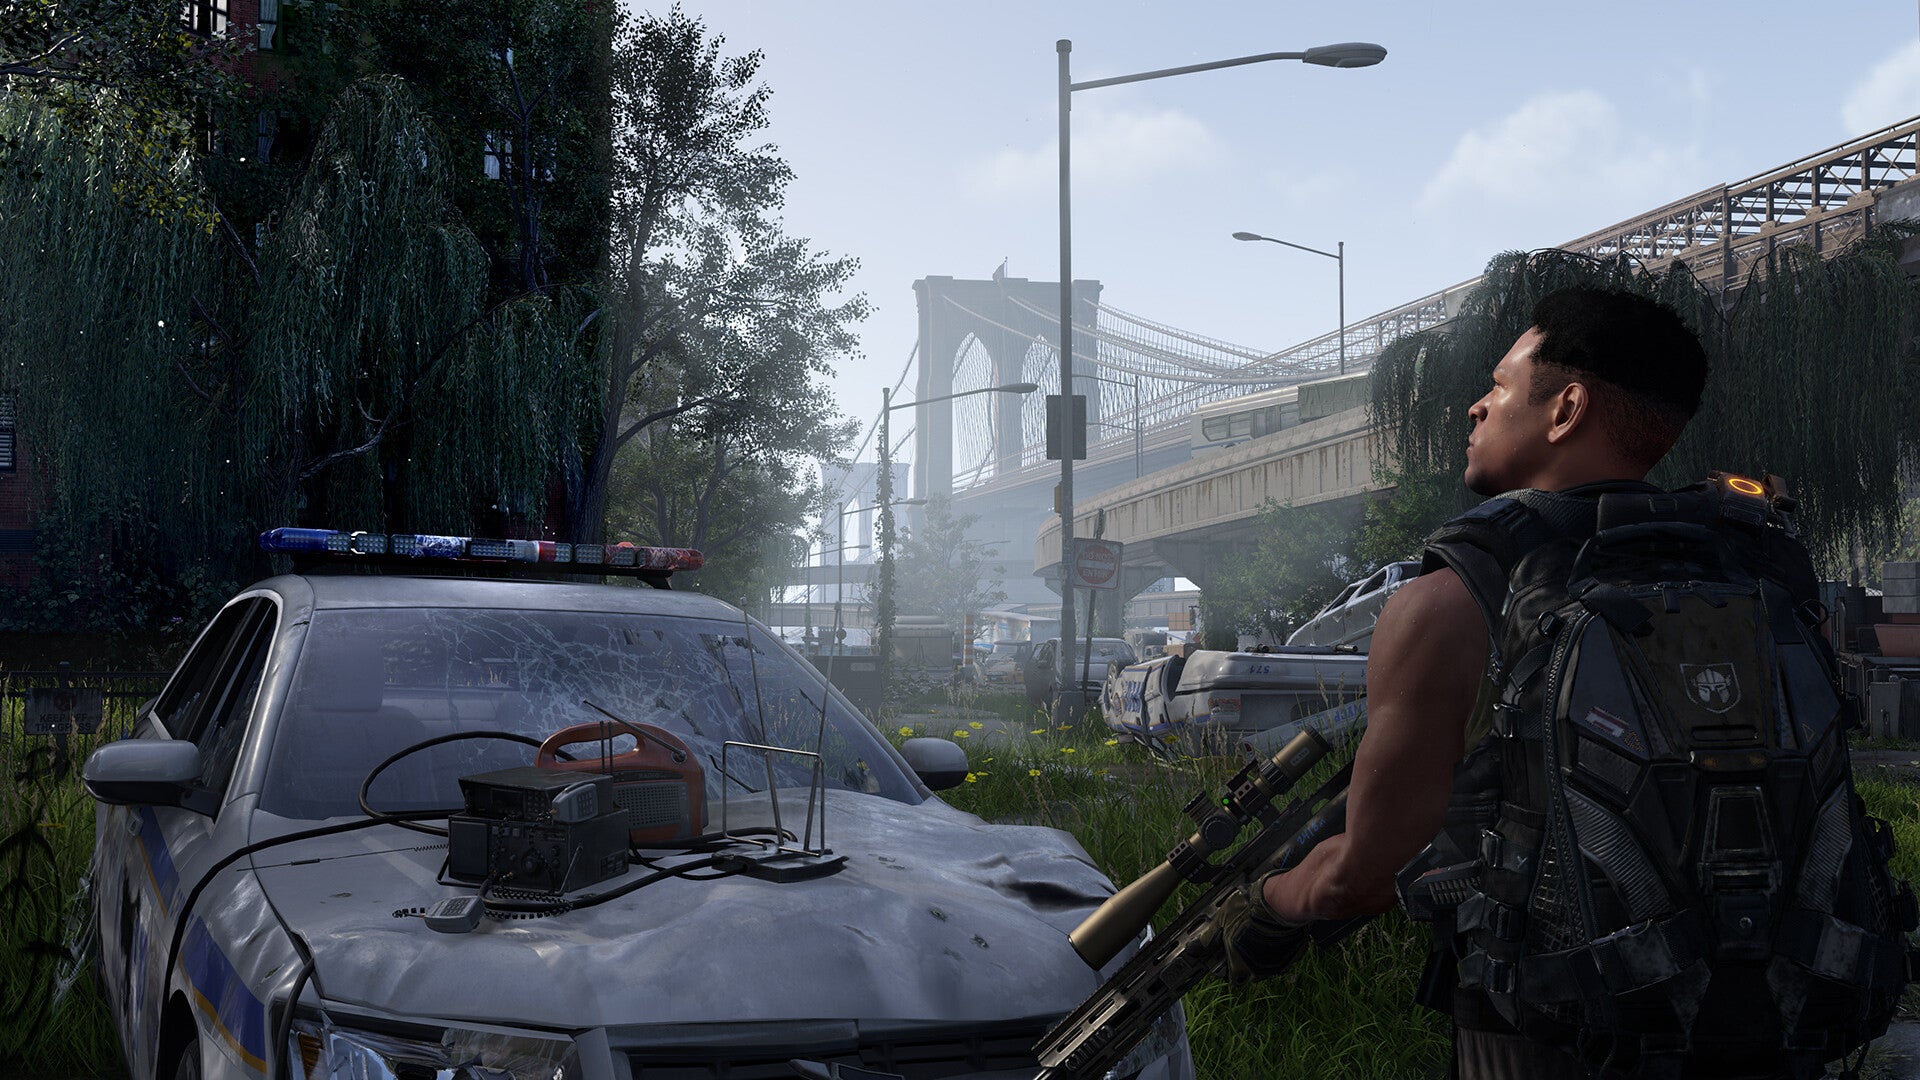 The Division 2 players who "circumvent game mechanics to gain excessive XP" will be banned, warns Ubisoft